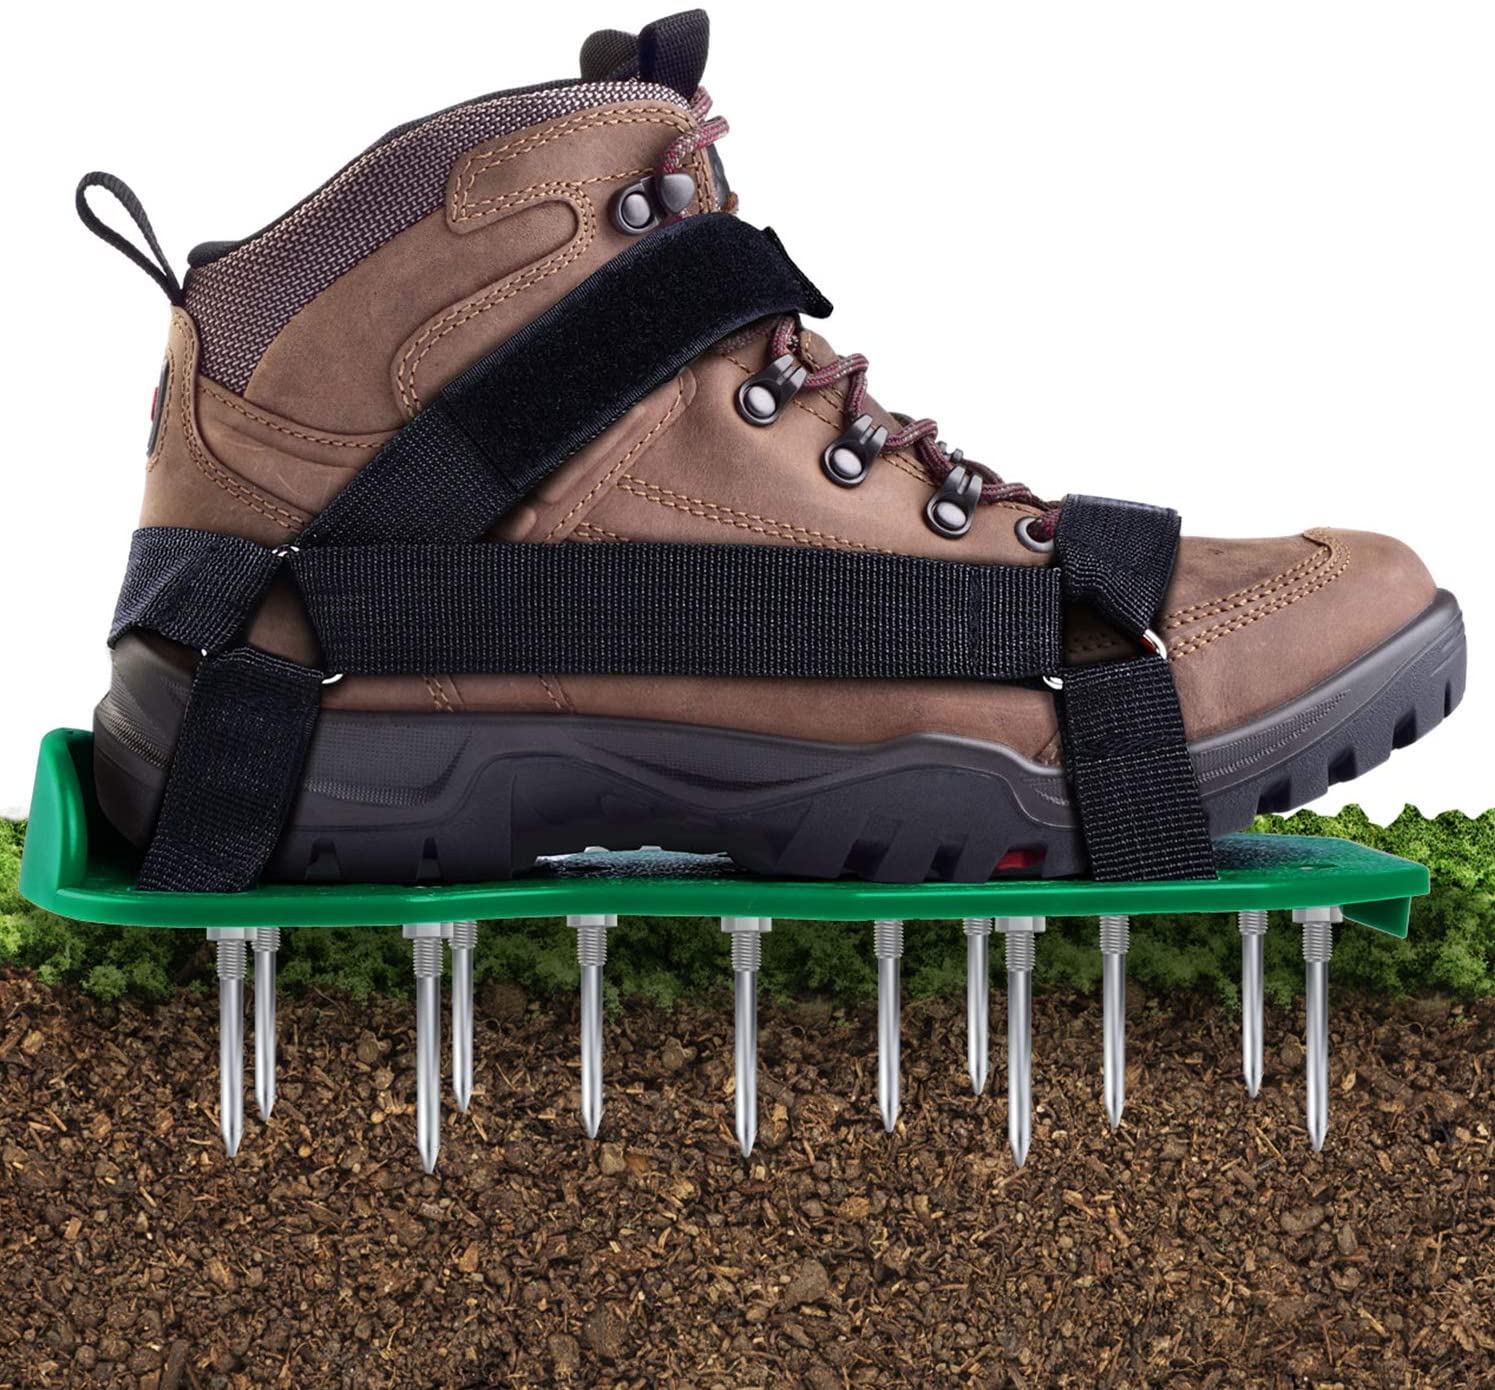 Review of Ohuhu Lawn Aerator Shoes with Hook & Loop Straps